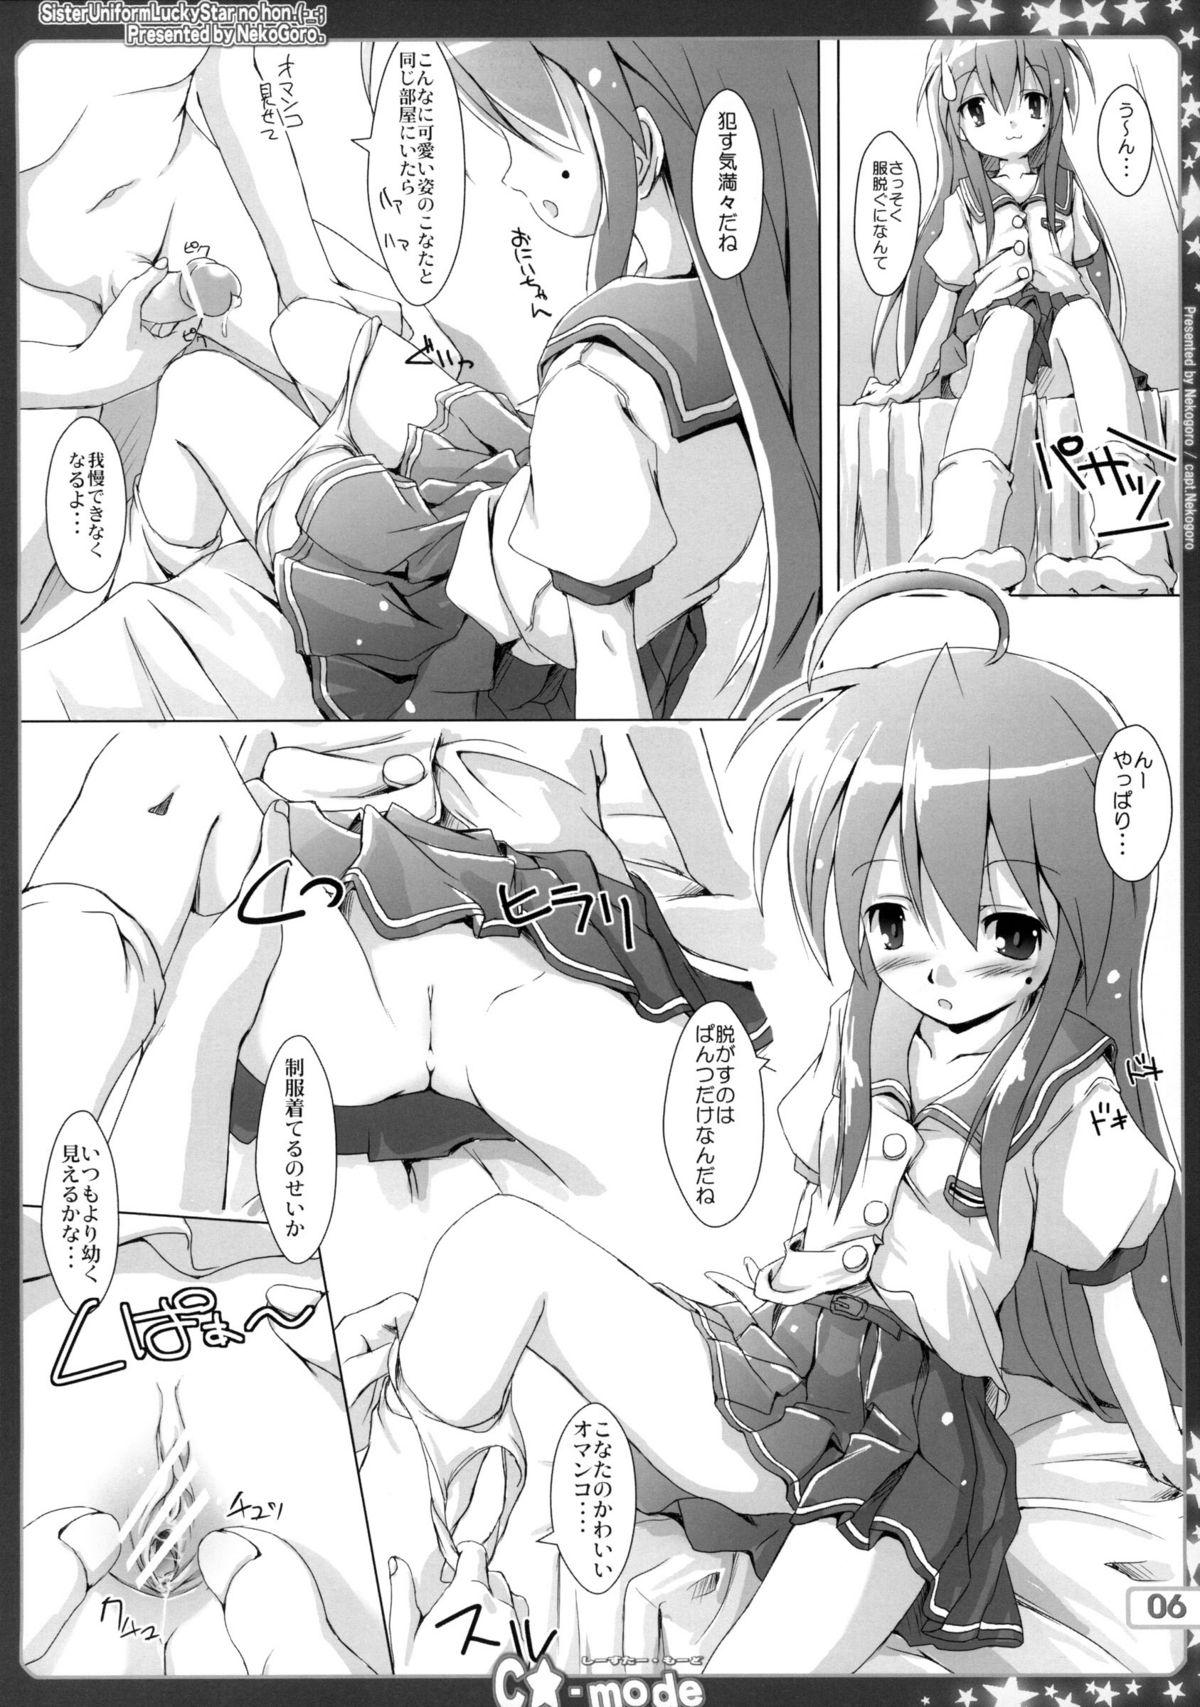 Shemales C-star mode vol.3 - Lucky star Peruana - Page 5